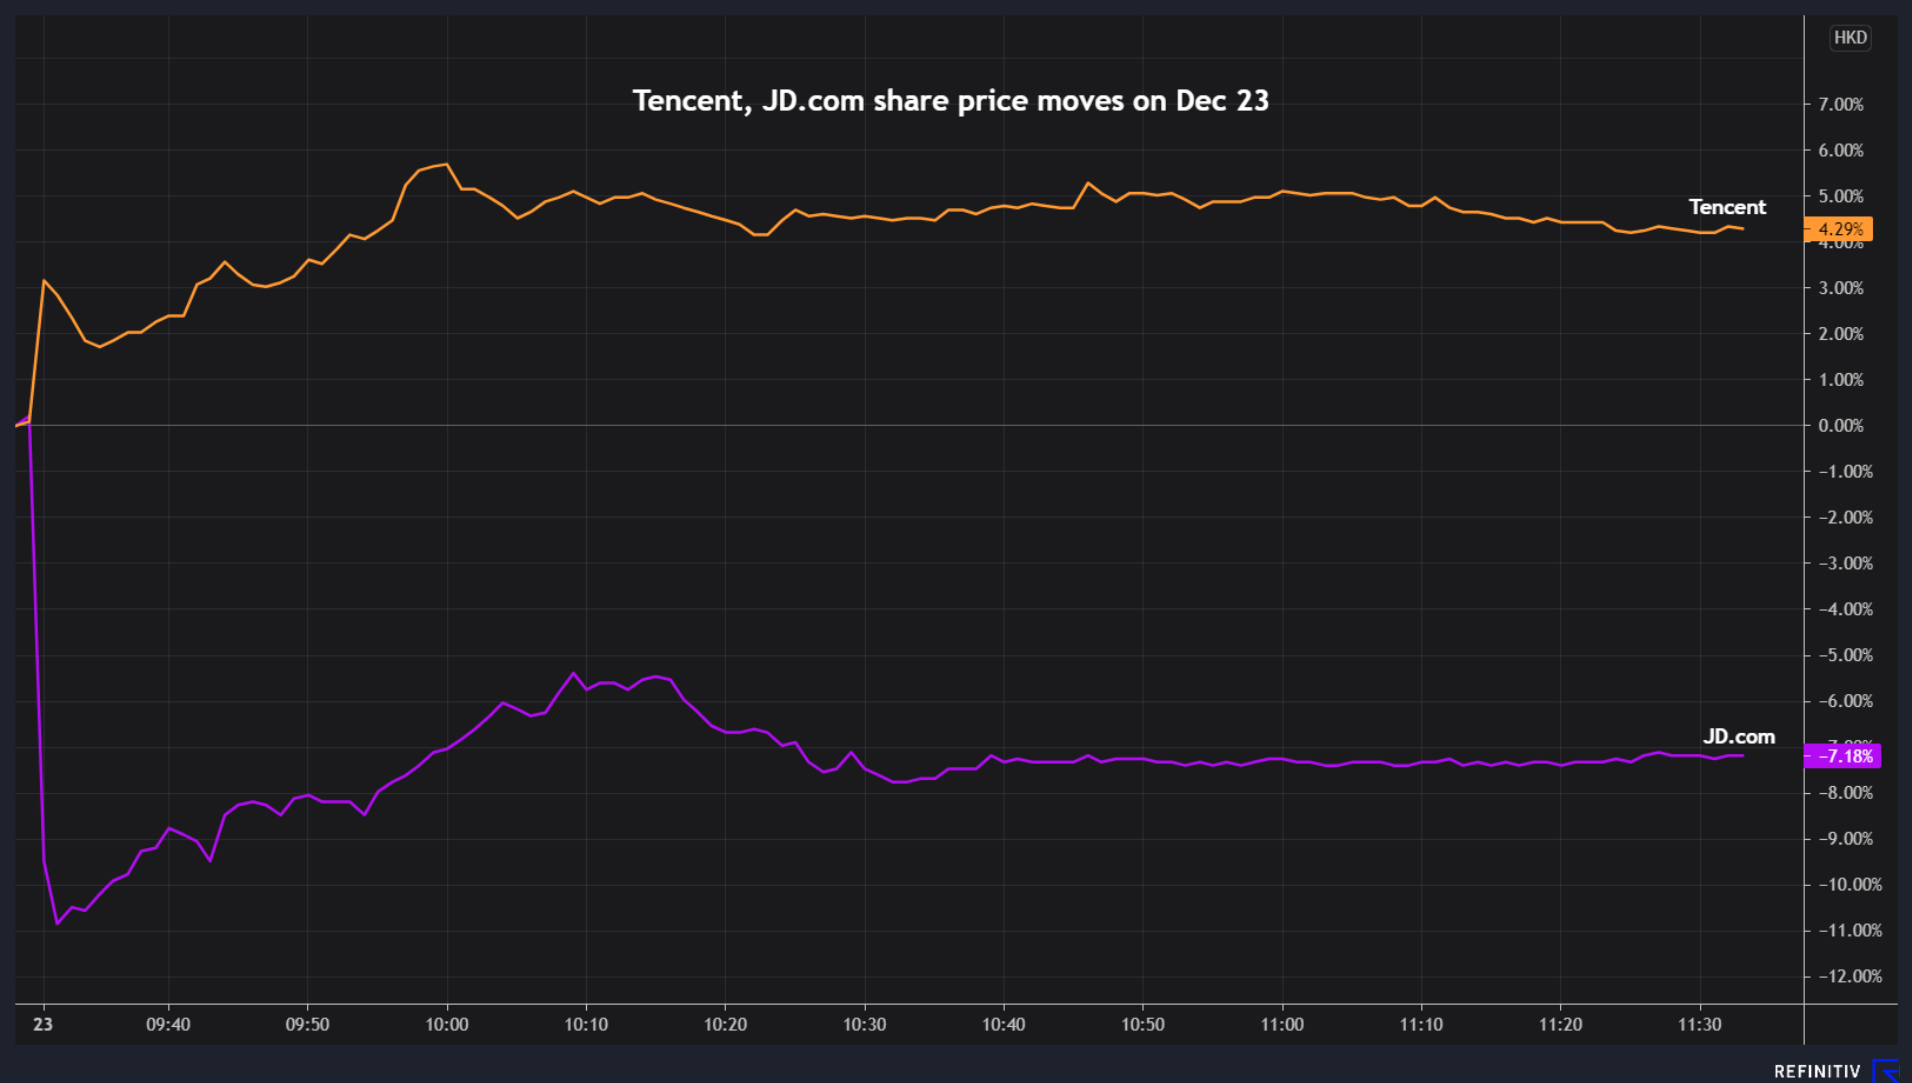 Shares of Tencent and JD on Dec 23